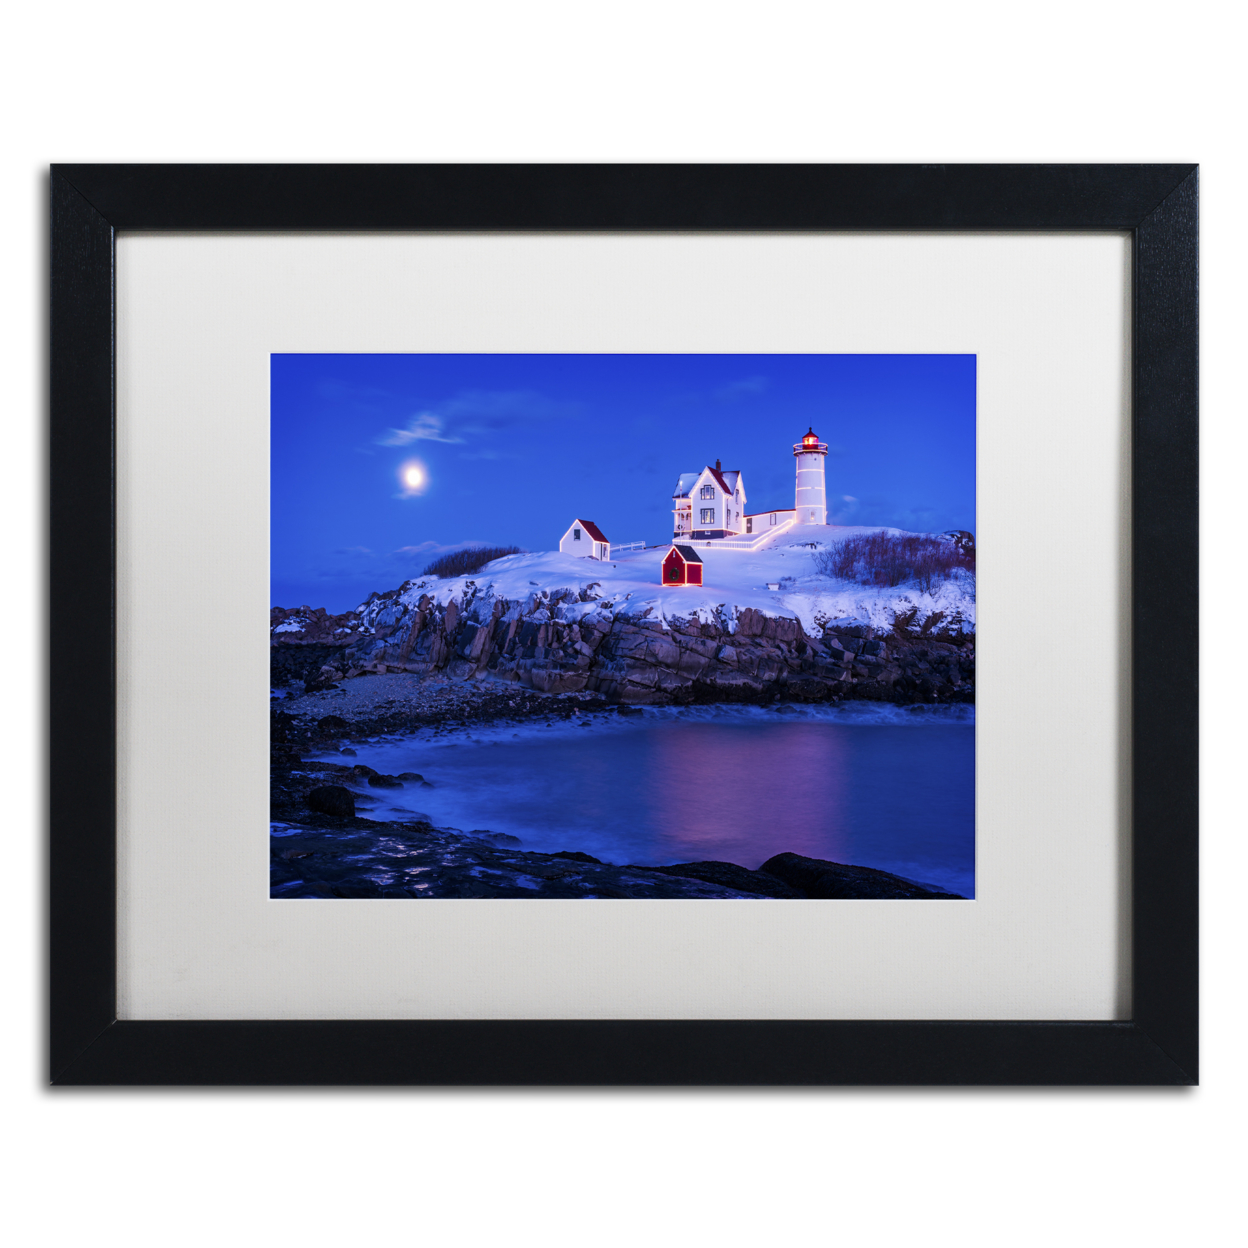 Michael Blanchette Photography 'Christmas At Nubble' Black Wooden Framed Art 18 X 22 Inches